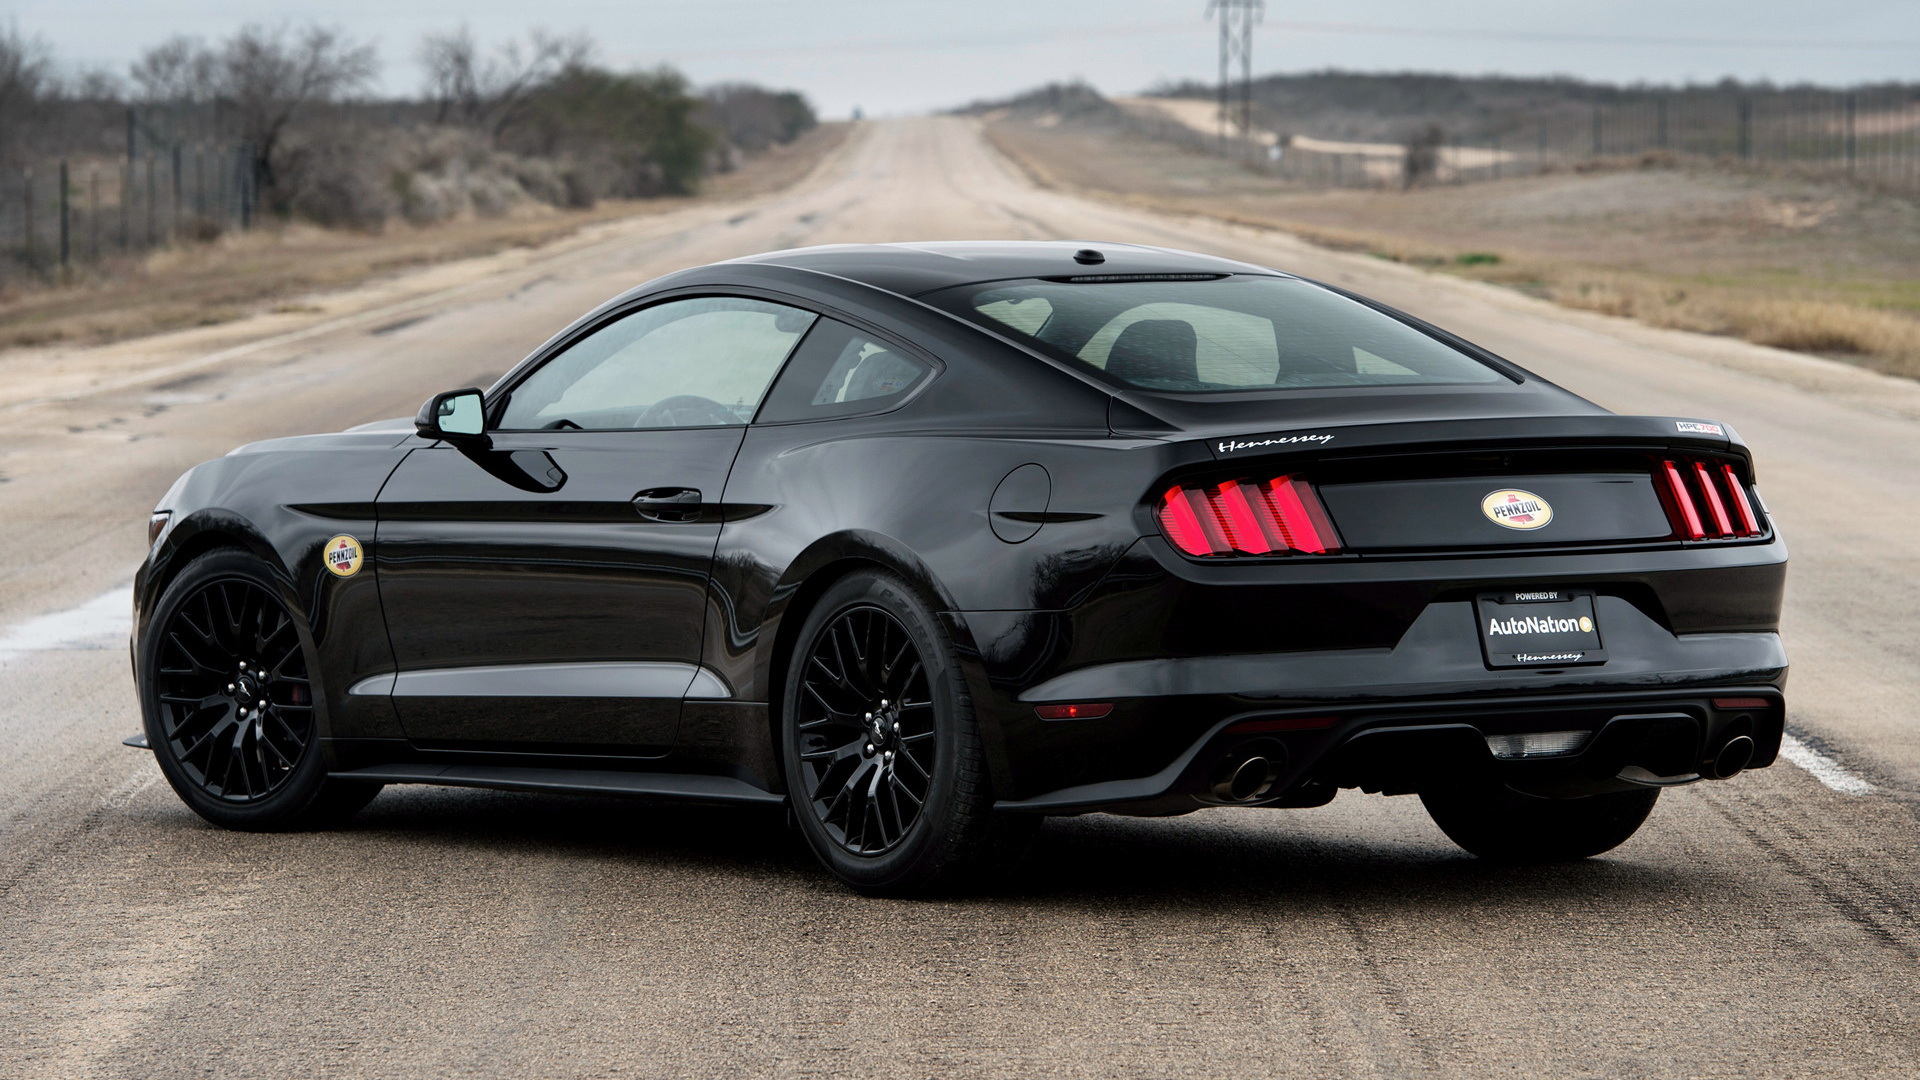 2015 Hennessey Mustang Gt Hpe700 Supercharged Hd Wallpaper Background Image 1920x1080